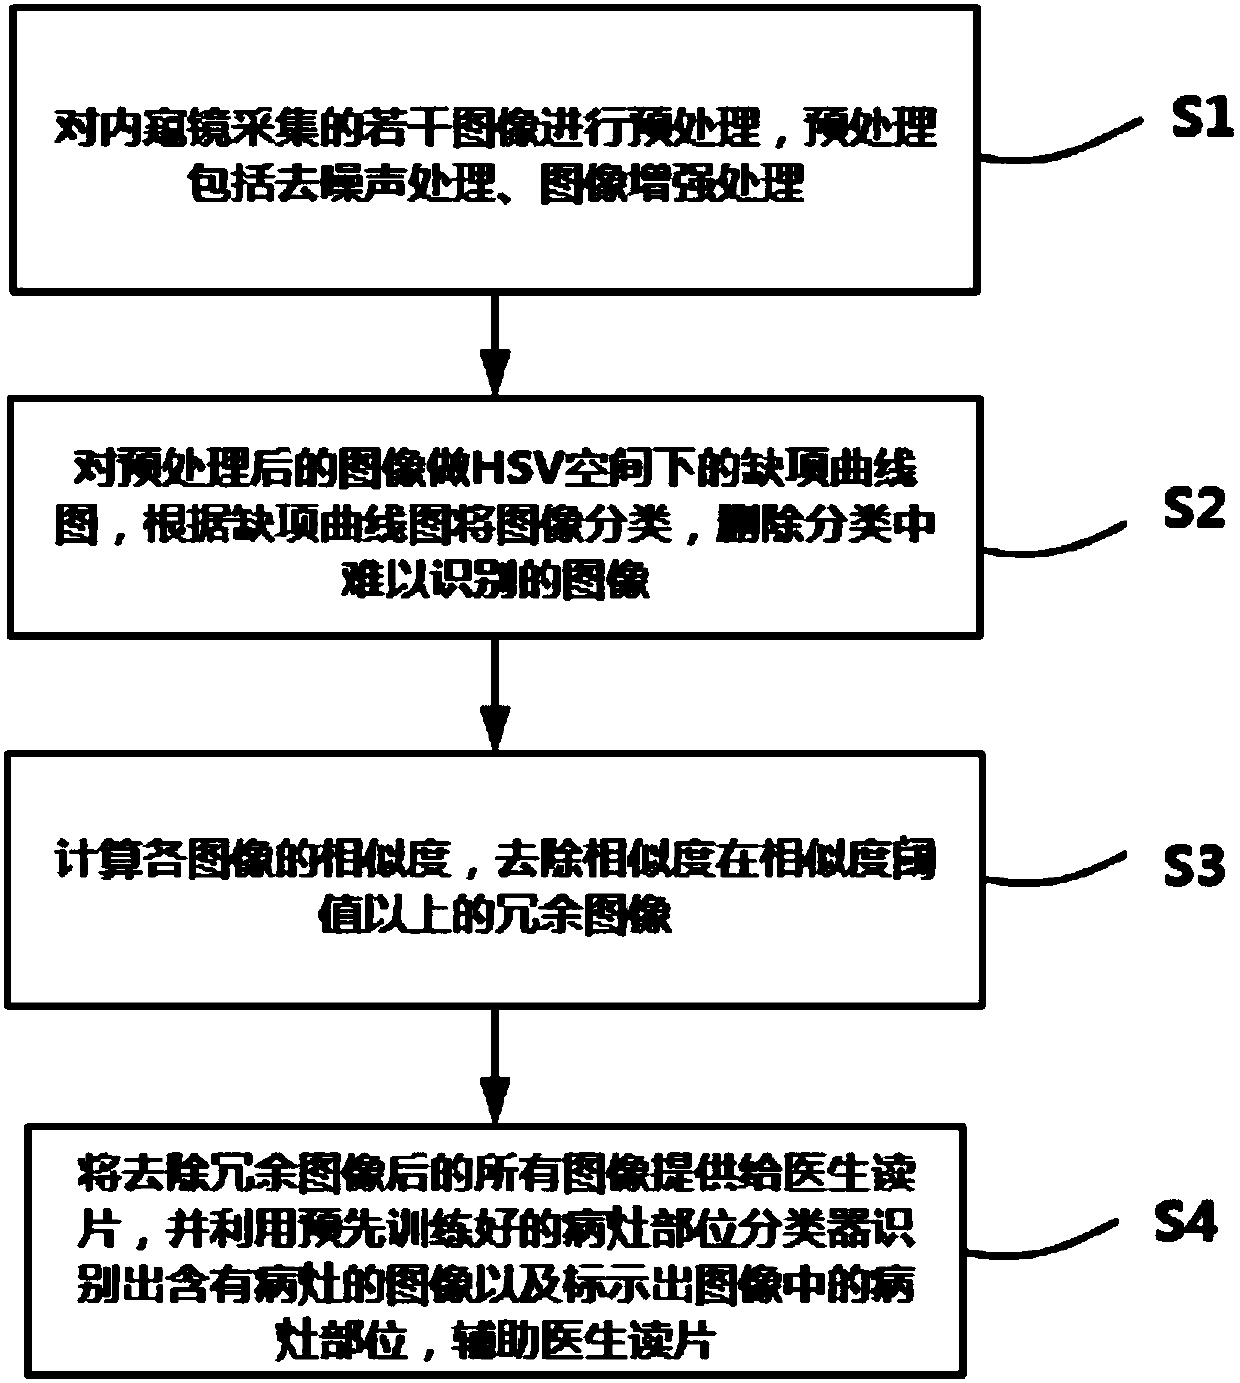 Endoscopic image processing method and system